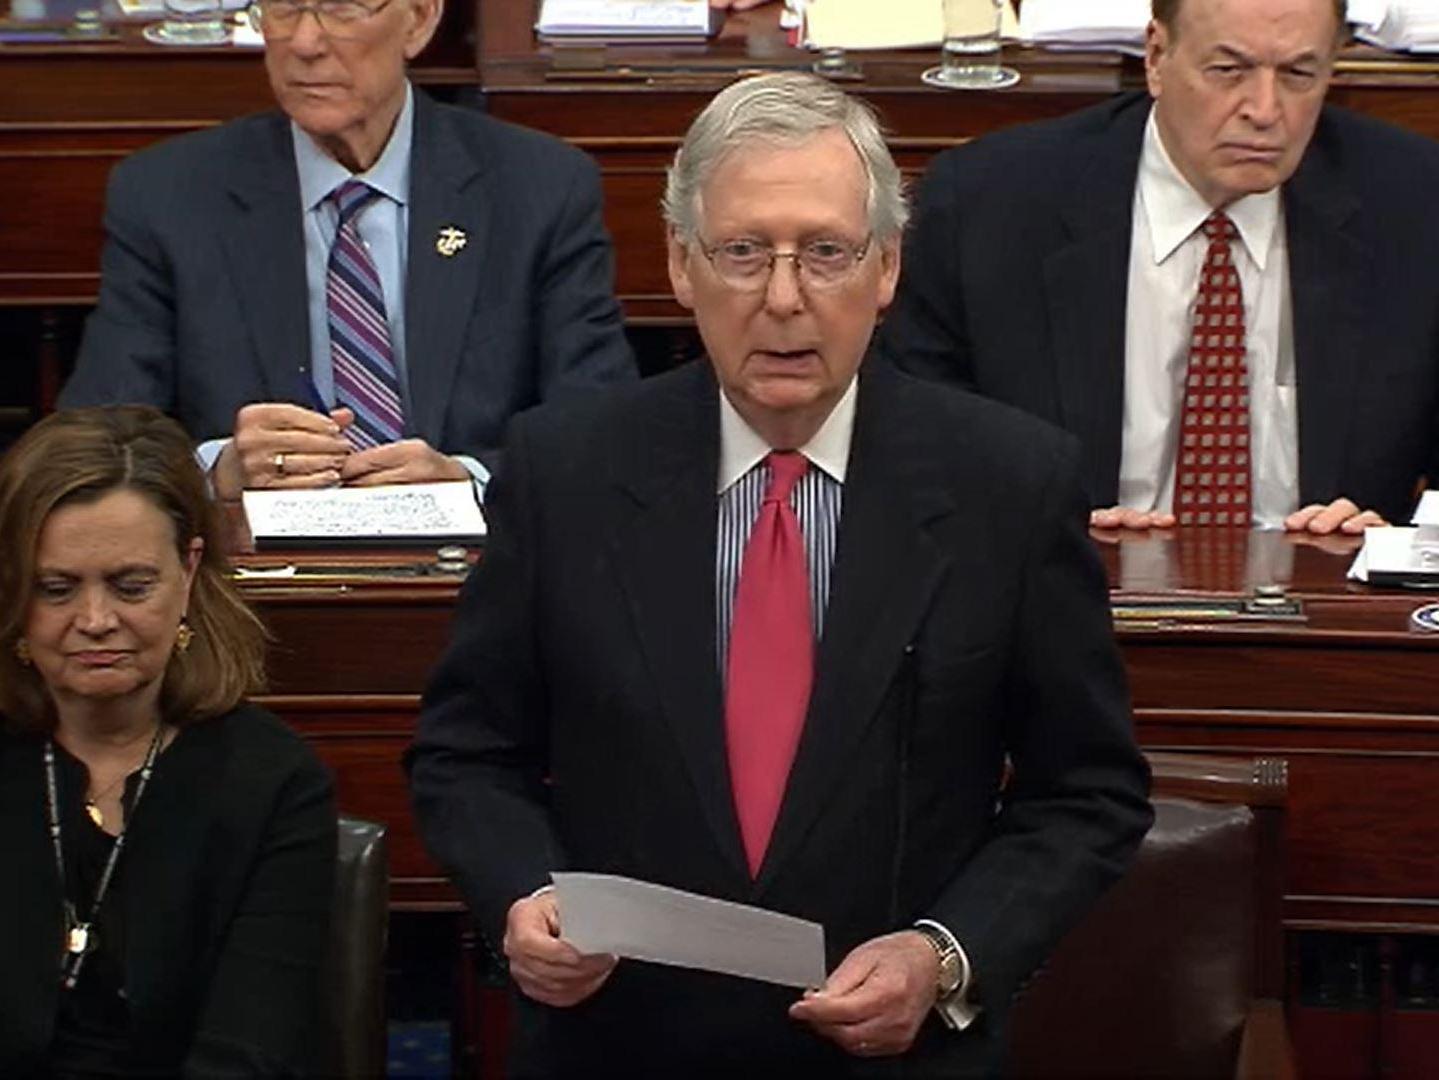 Senator Mitch McConnell addresses the Senate during the president's impeachment trial Jan 28 2020